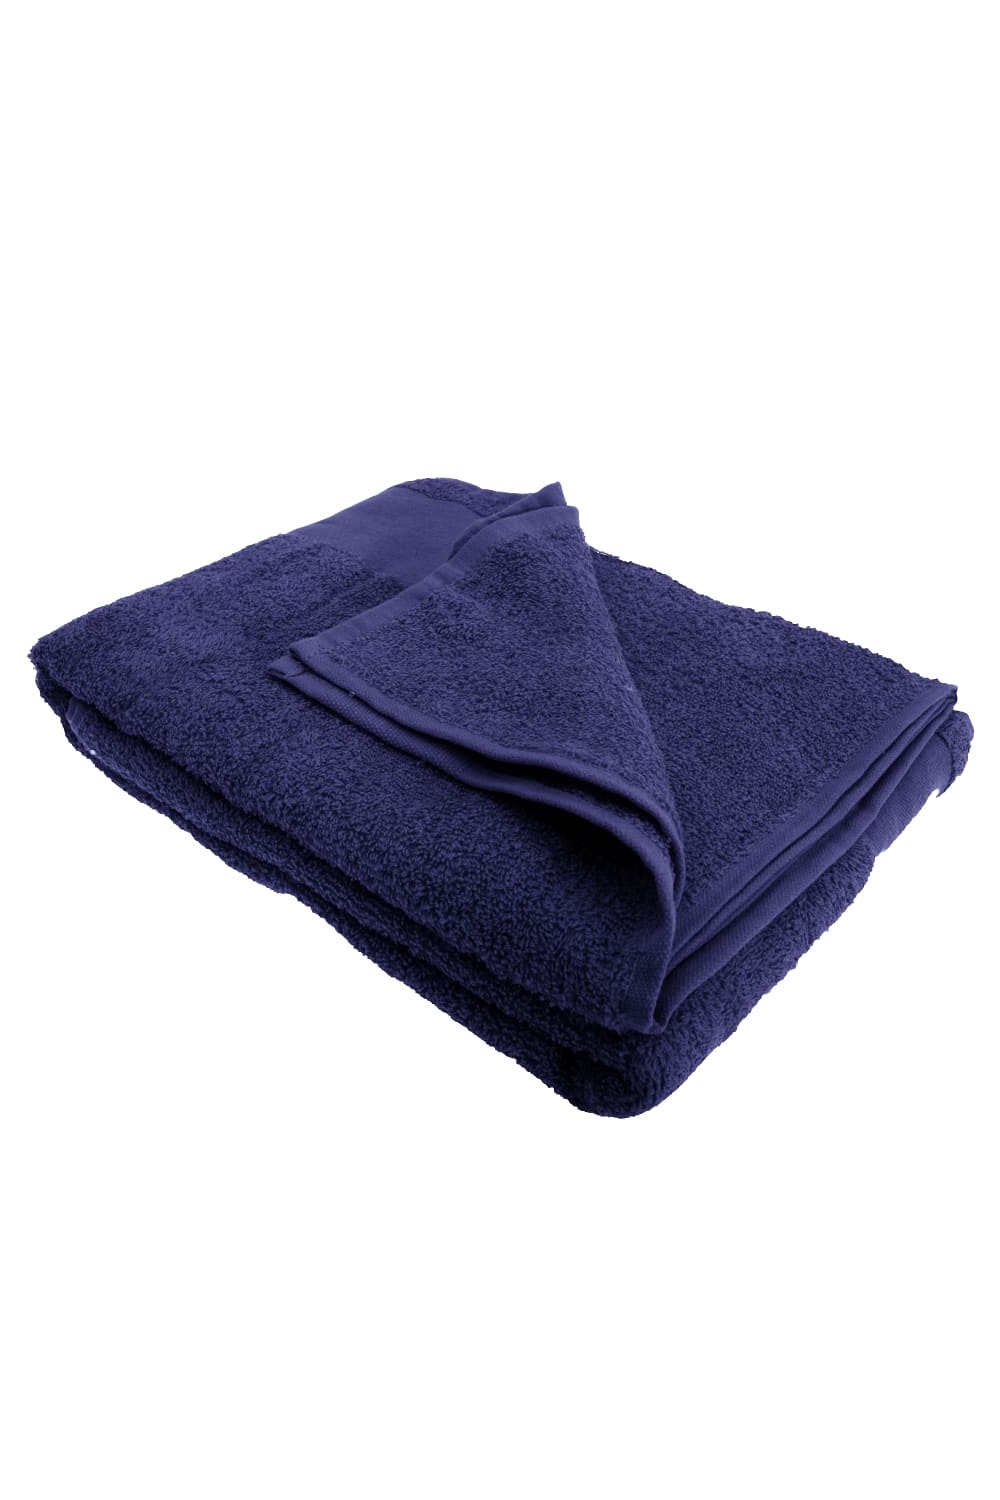 SOLS Island Bath Sheet / Towel (40 X 60 inches) (French Navy) (ONE)